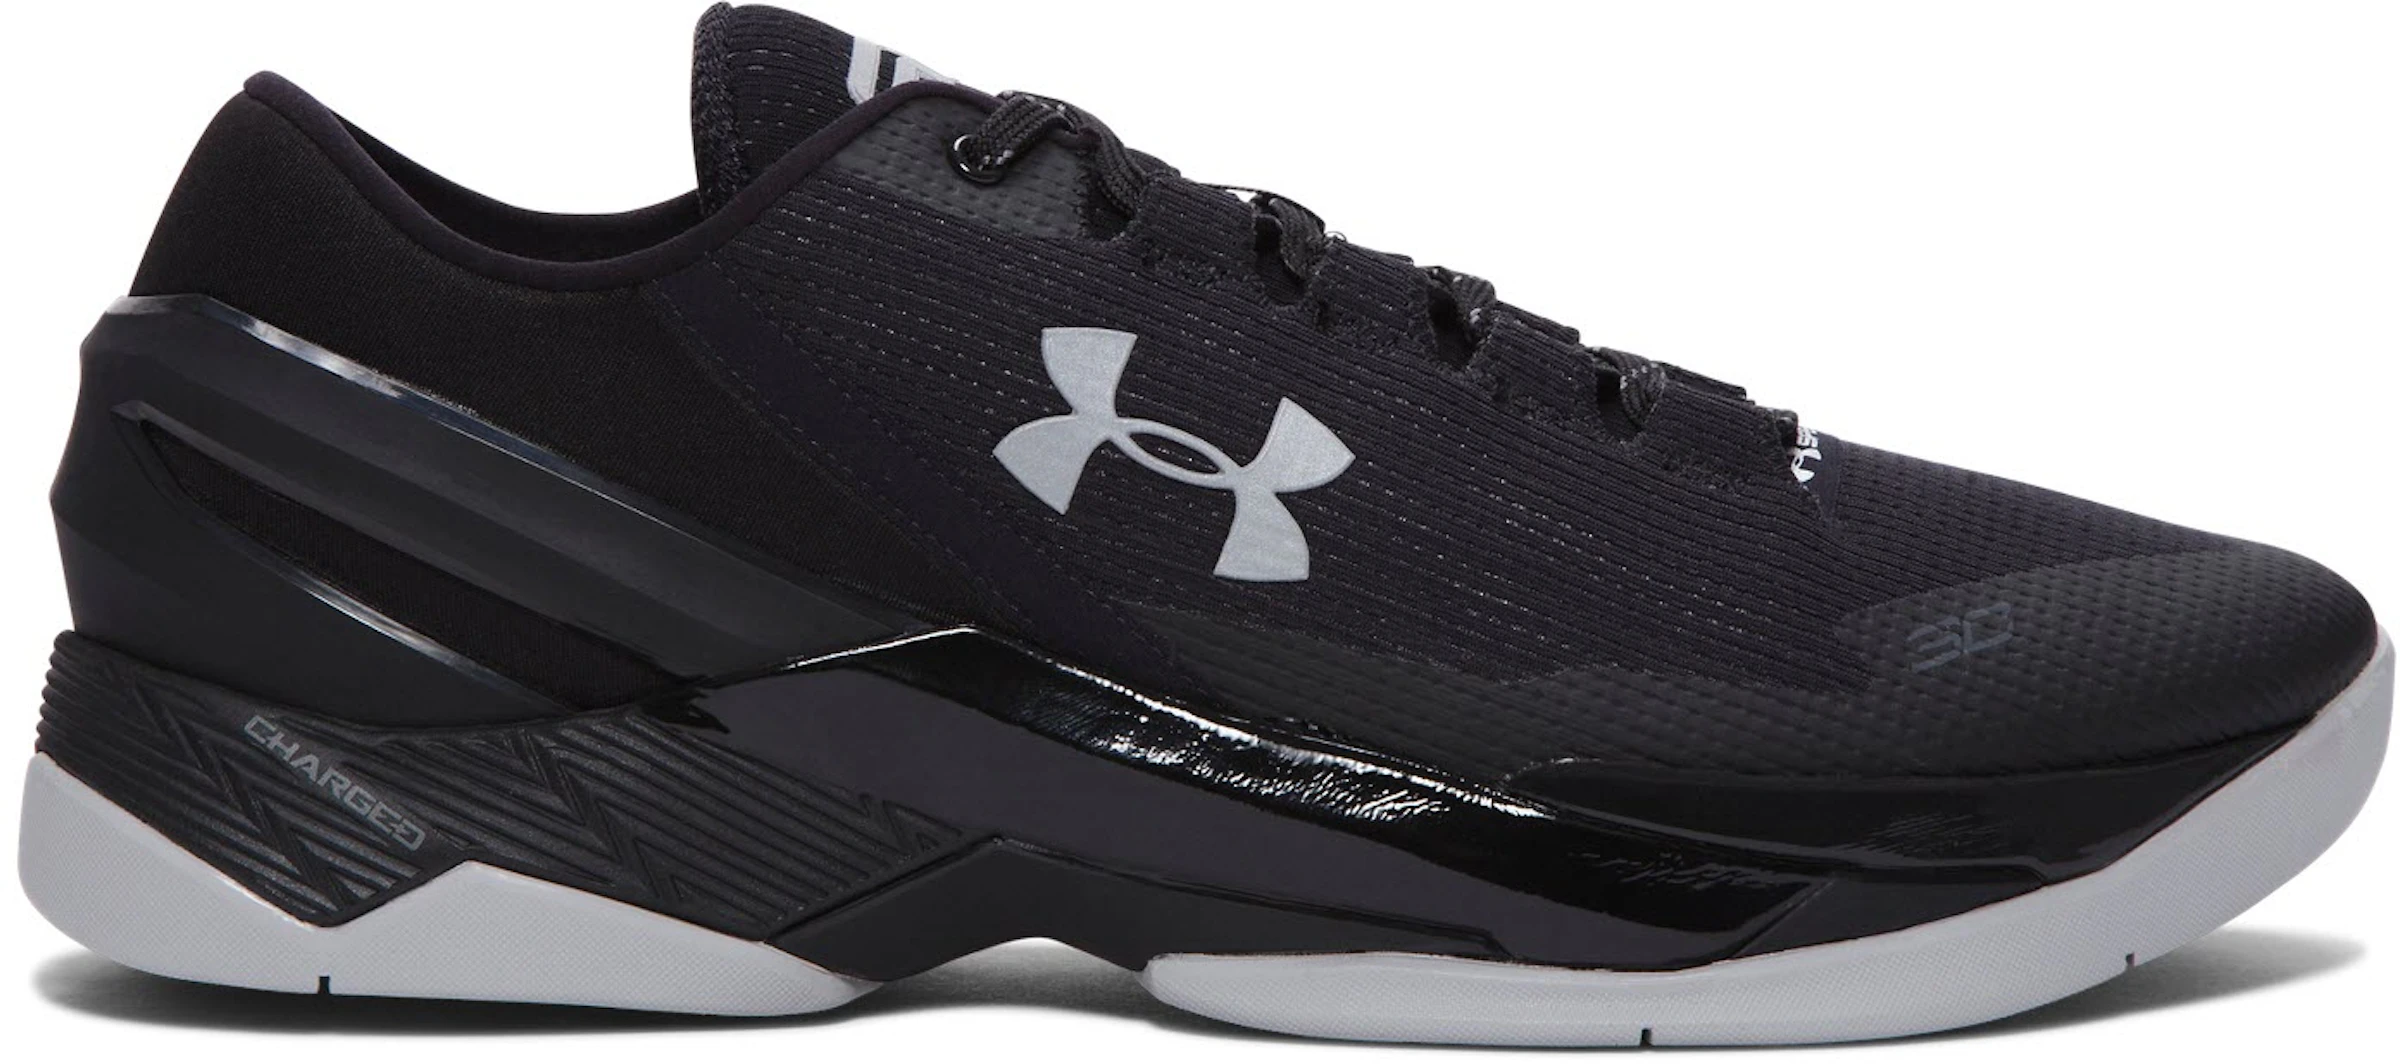 Under Armour Steph Curry 2 Low 'Chef' Backlash - Under Armour Rehires  Designer Dave Dombrow